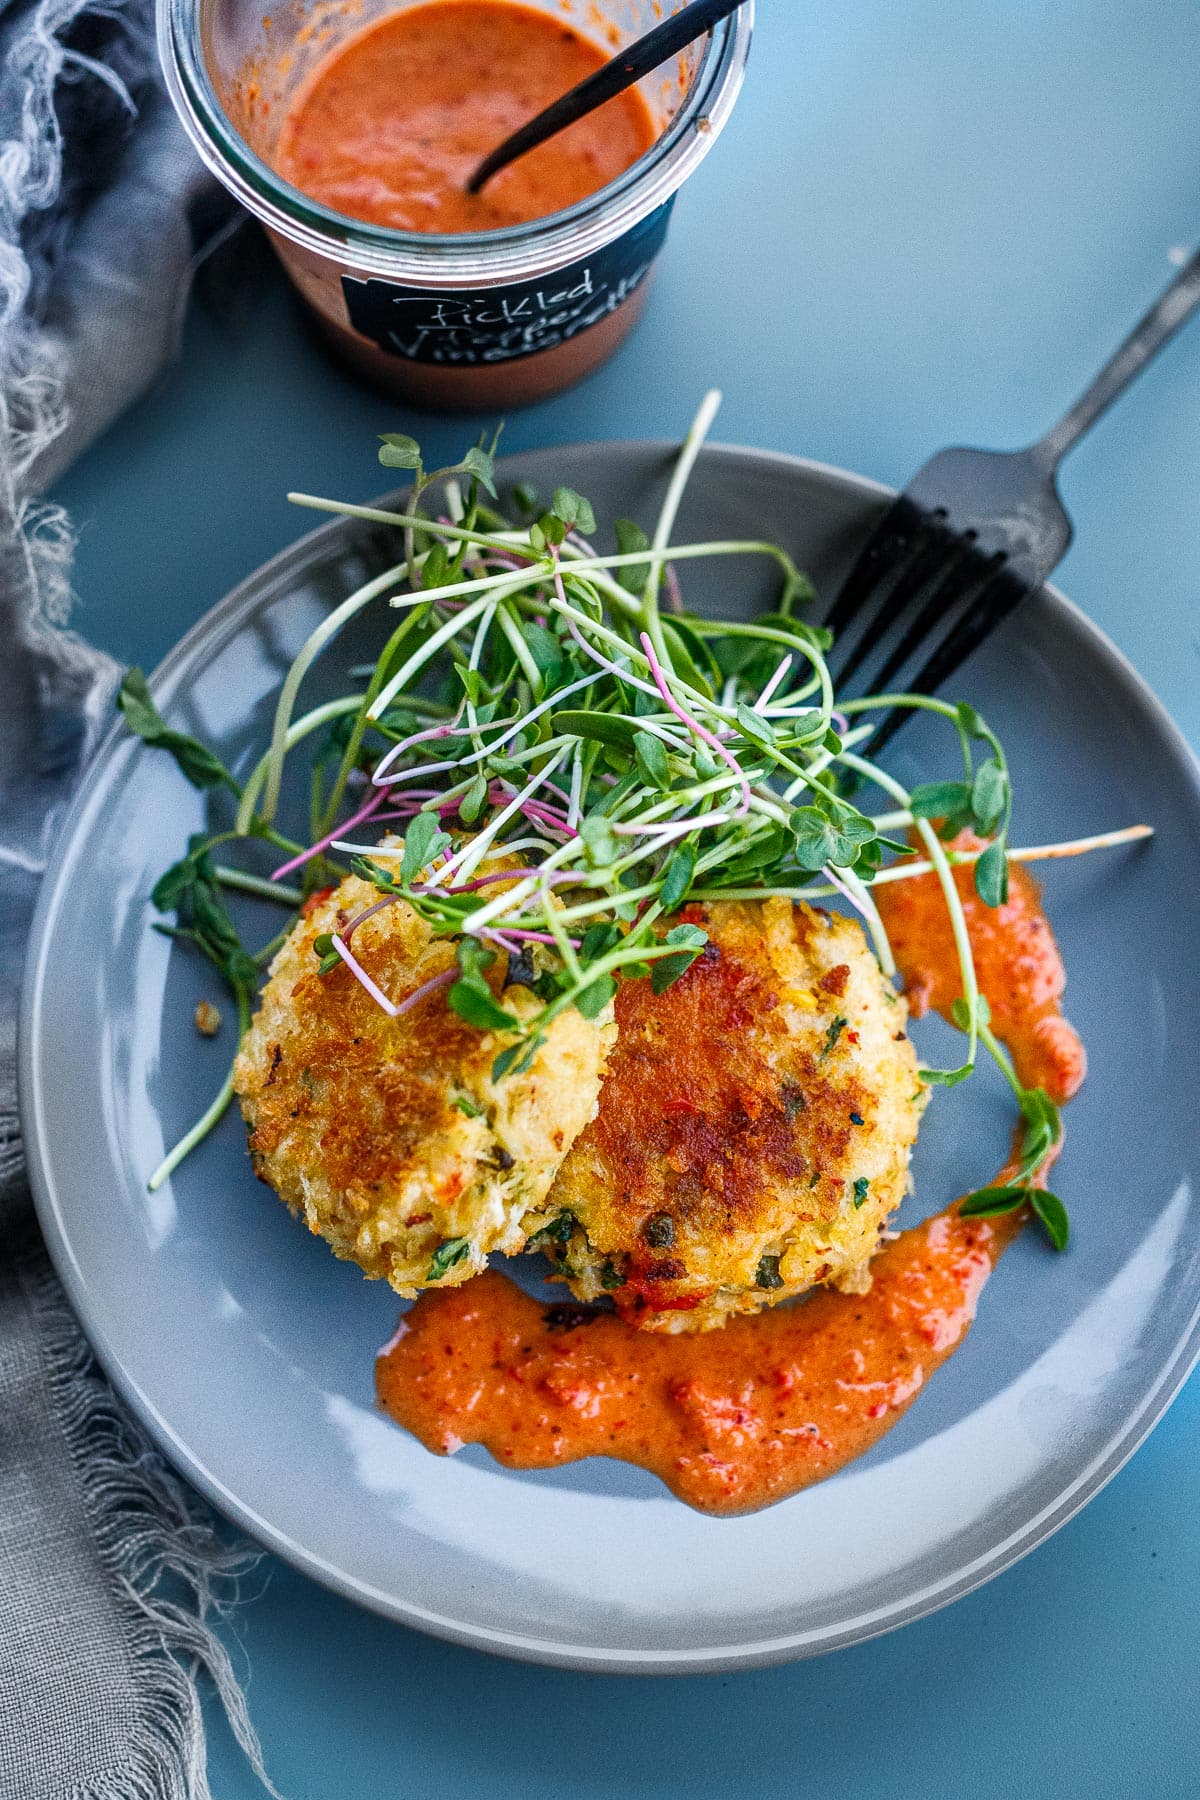 These zesty crab cakes are the Best! Made with fresh crab, lime zest, cilantro and jalapeño, served up with a red pepper vinaigrette. Feel free to use lemon and parsley instead! Makes 6 large crab cakes, or 12 small appetizer crab cakes. 